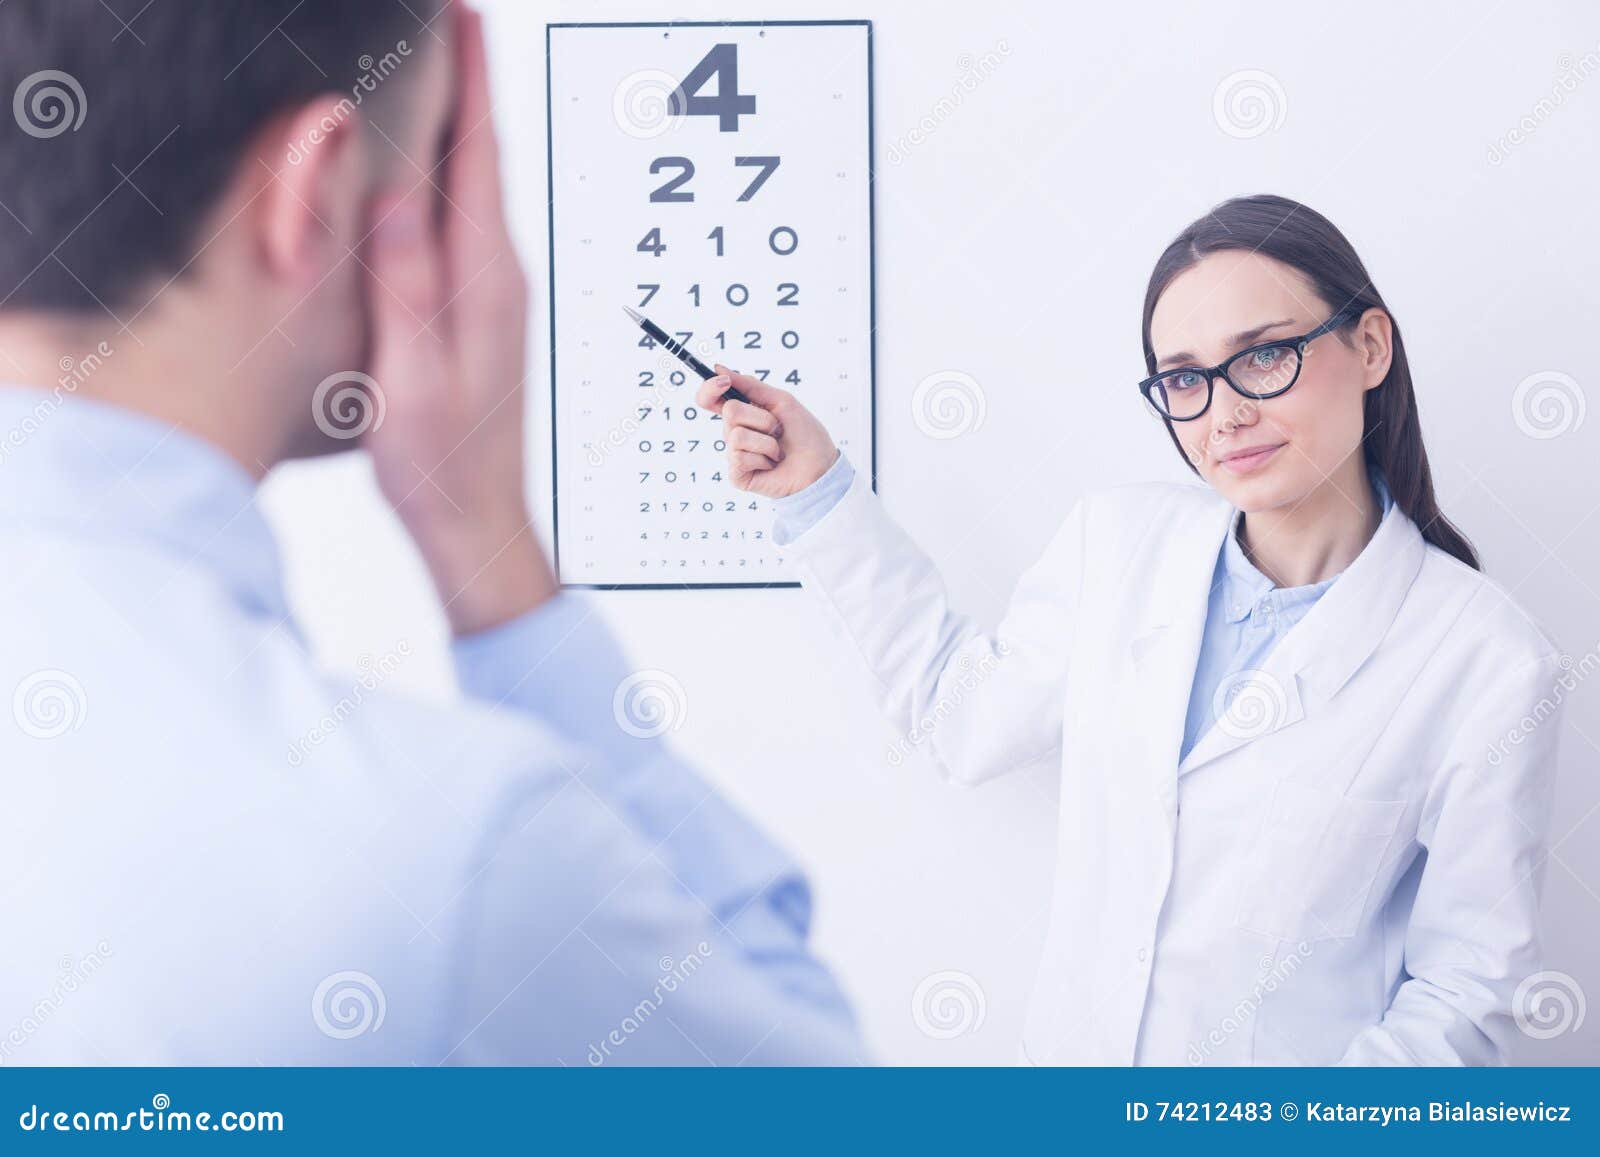 check your vision at doctor's